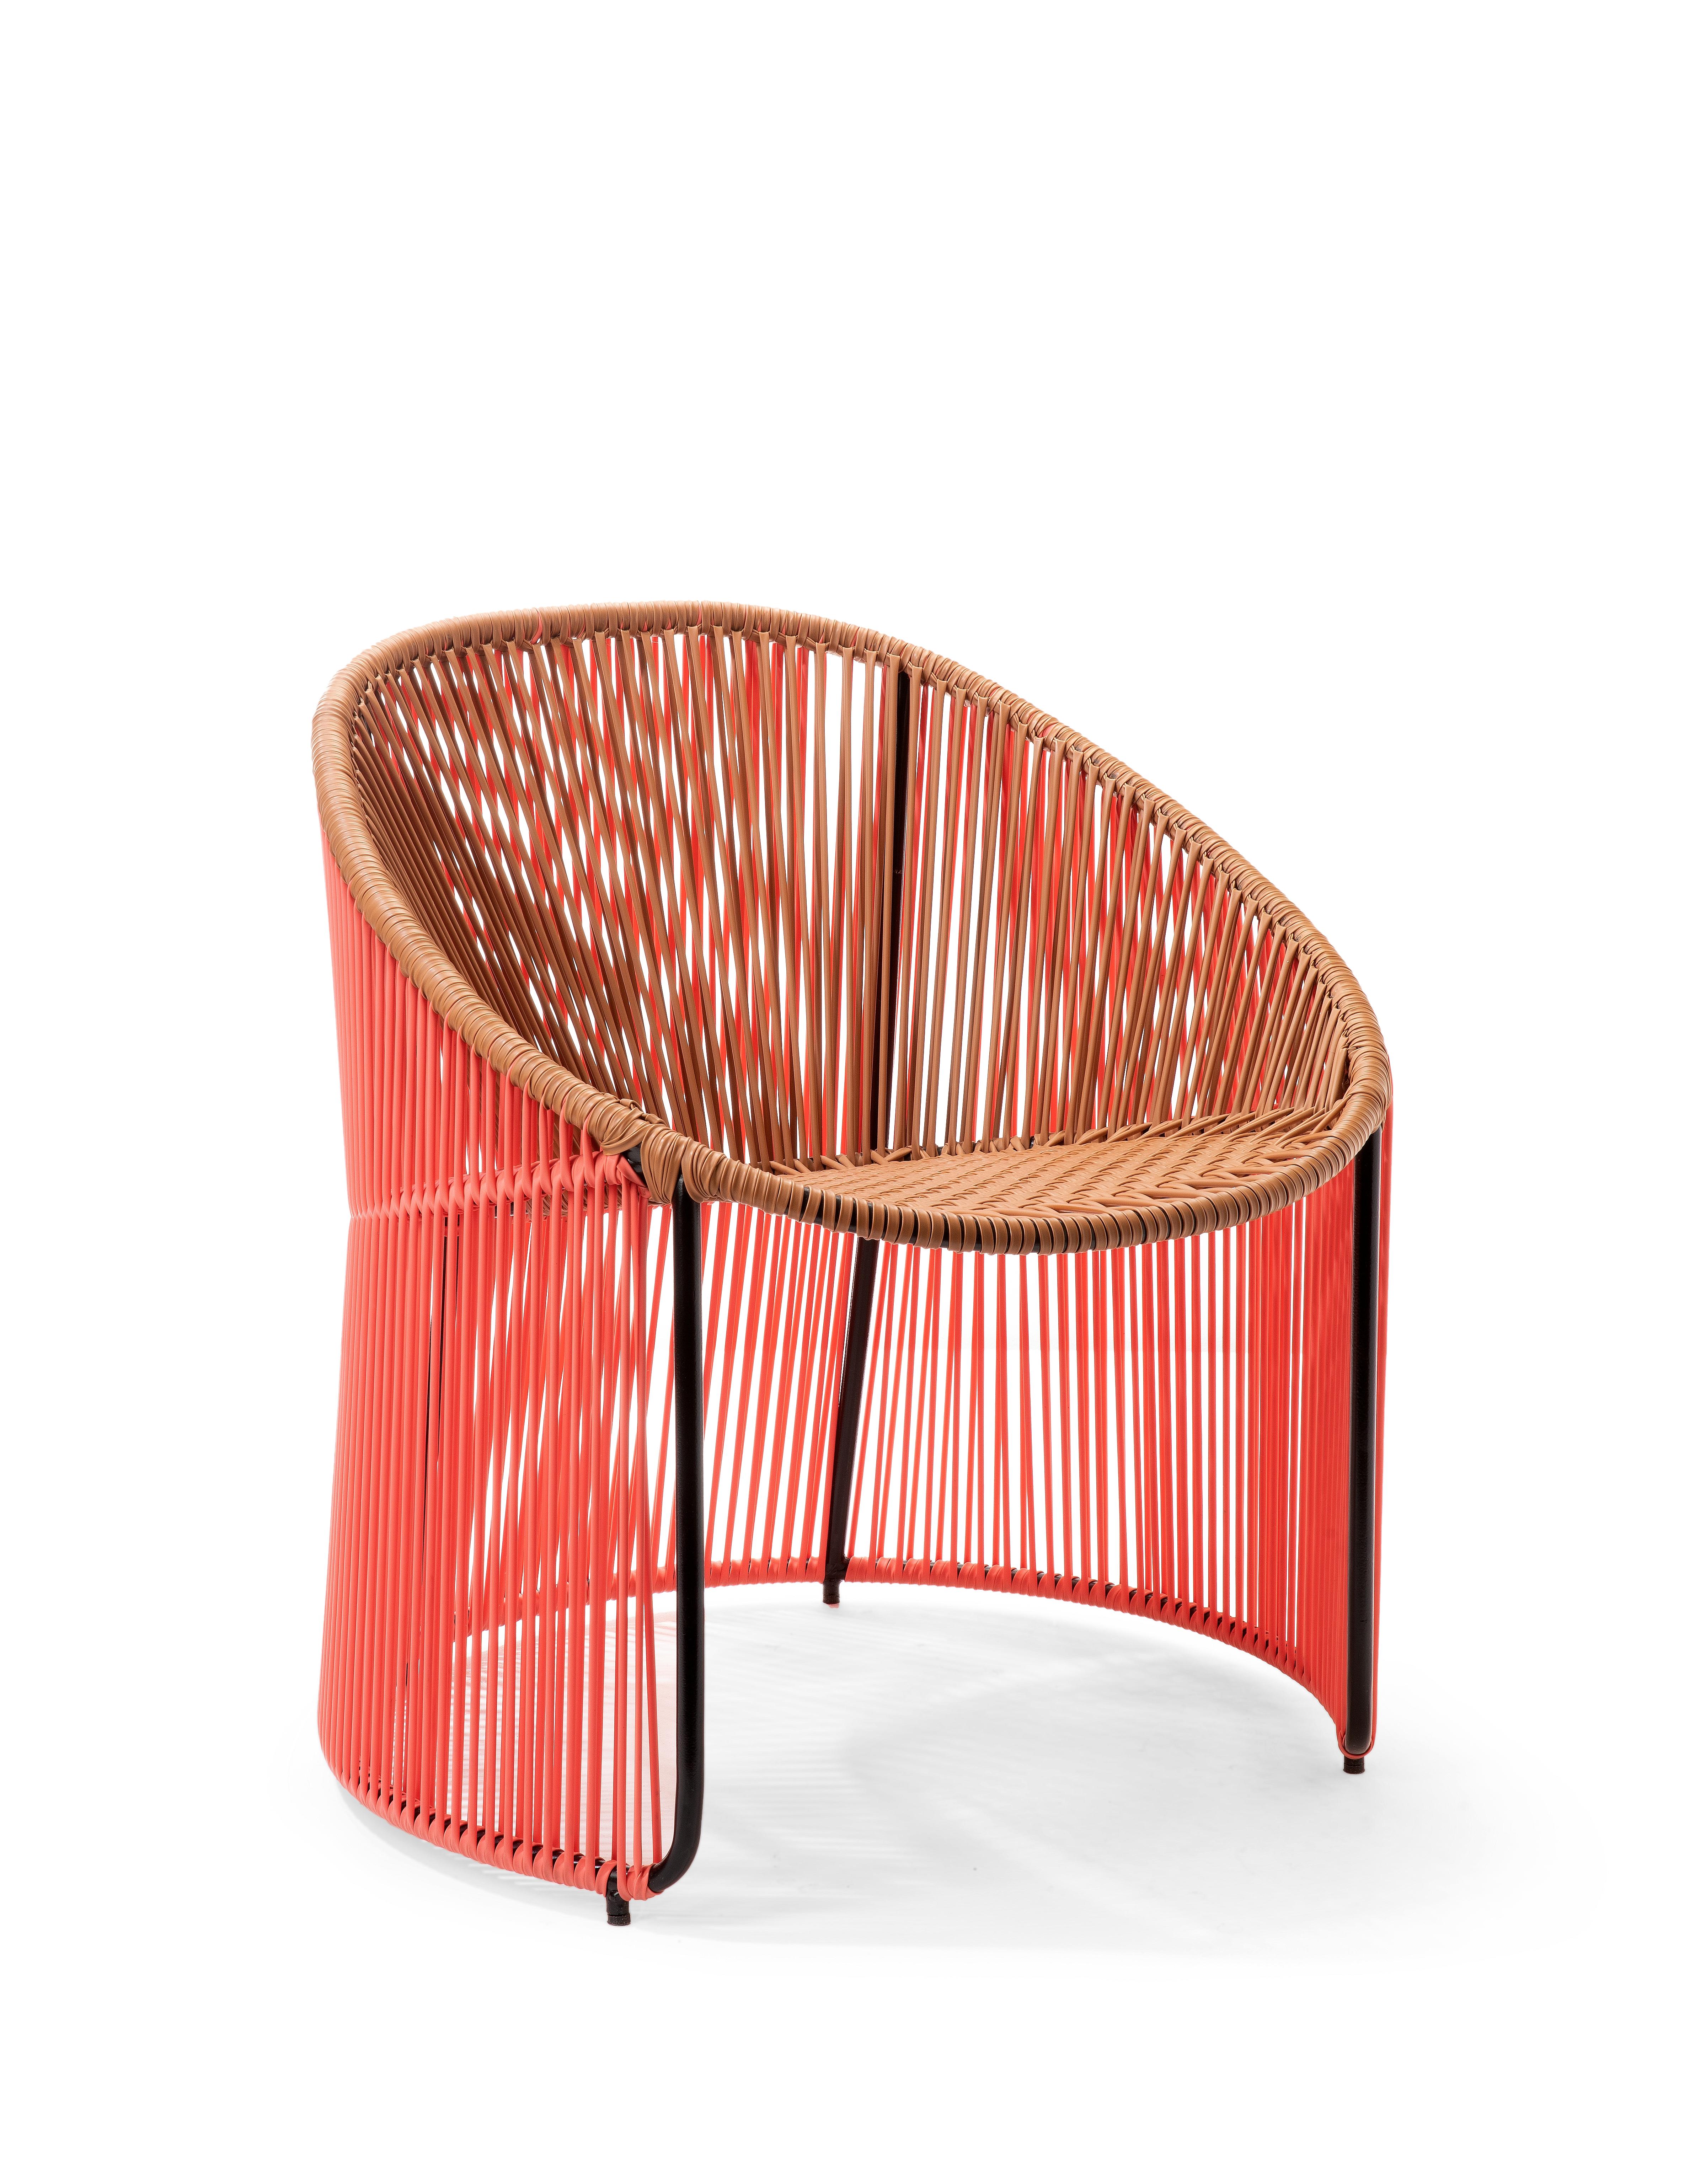 Coral Cartagenas lounge chair by Sebastian Herkner
Materials: PVC strings. Galvanized and powder-coated tubular steel frame
Technique: made from recycled plastic. Weaved by local craftspeople in Colombia. 
Dimensions: W 64 x D 70 x H 74 cm